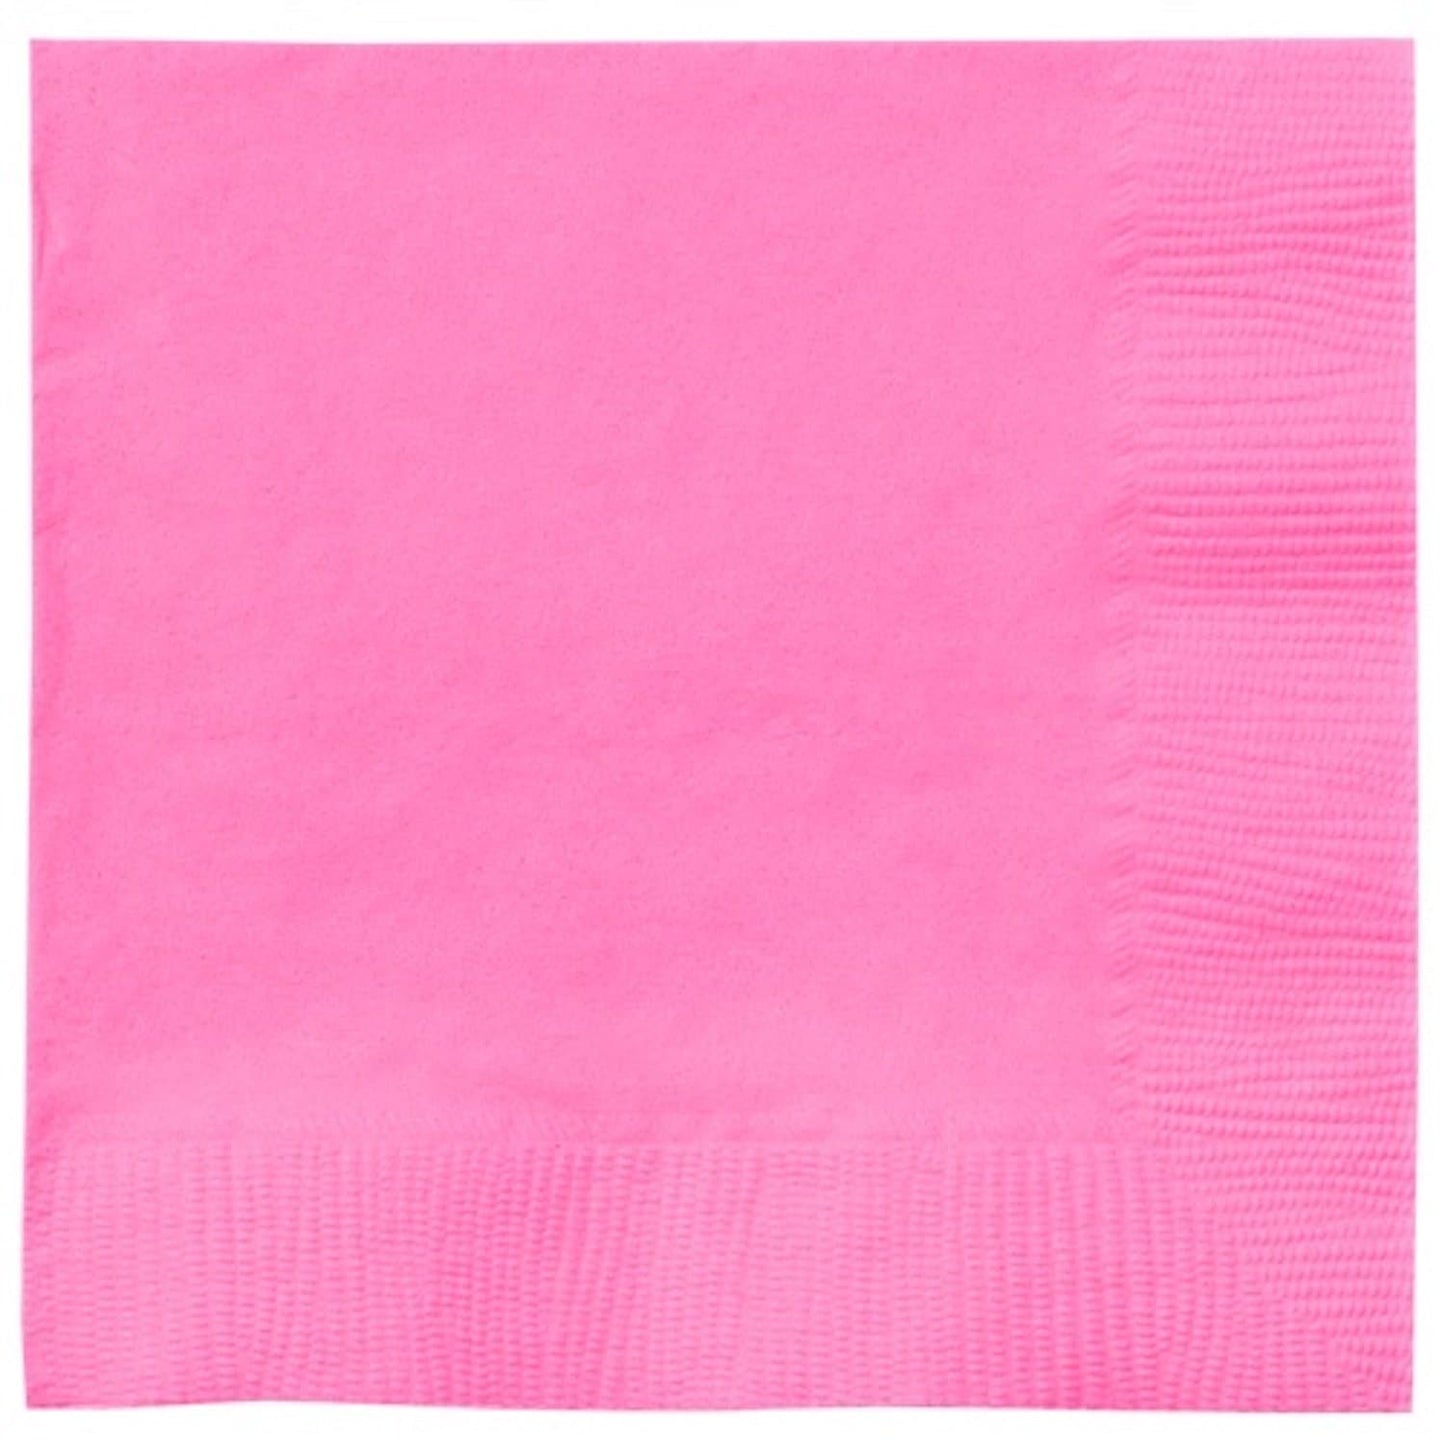 SALE Hot Pink Lunch Napkins 20 count  Party Dimensions   